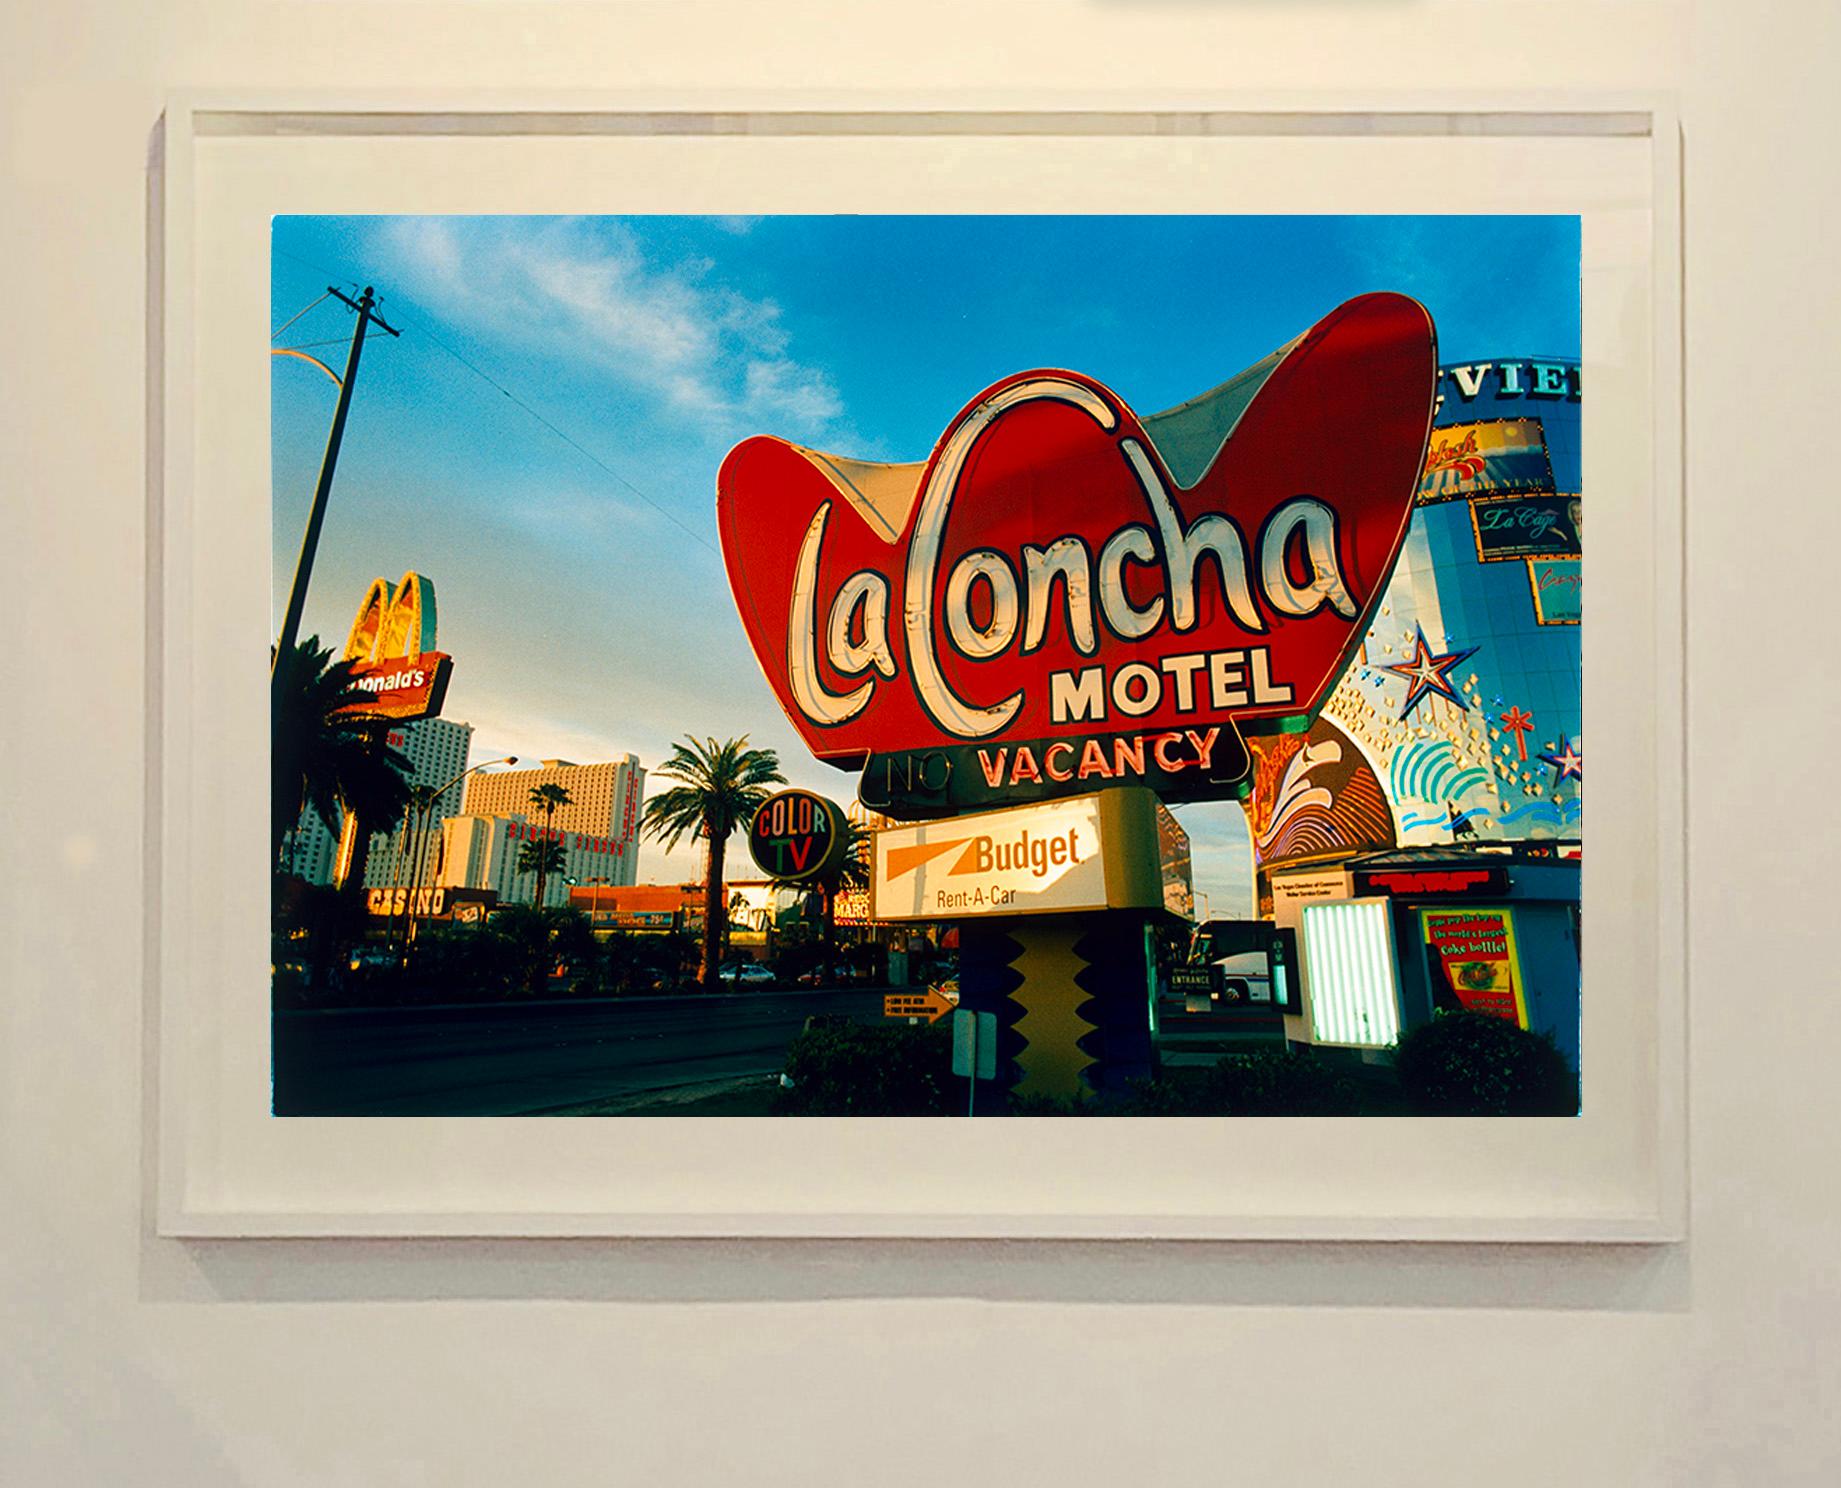 The iconic architecture of the La Concha Motel in Las Vegas, was captured by Richard Heeps for his 'Dream in Colour' series, before its closure in 2004. Designed by Paul Williams, it is synonymous of the Googie style architecture popular in America